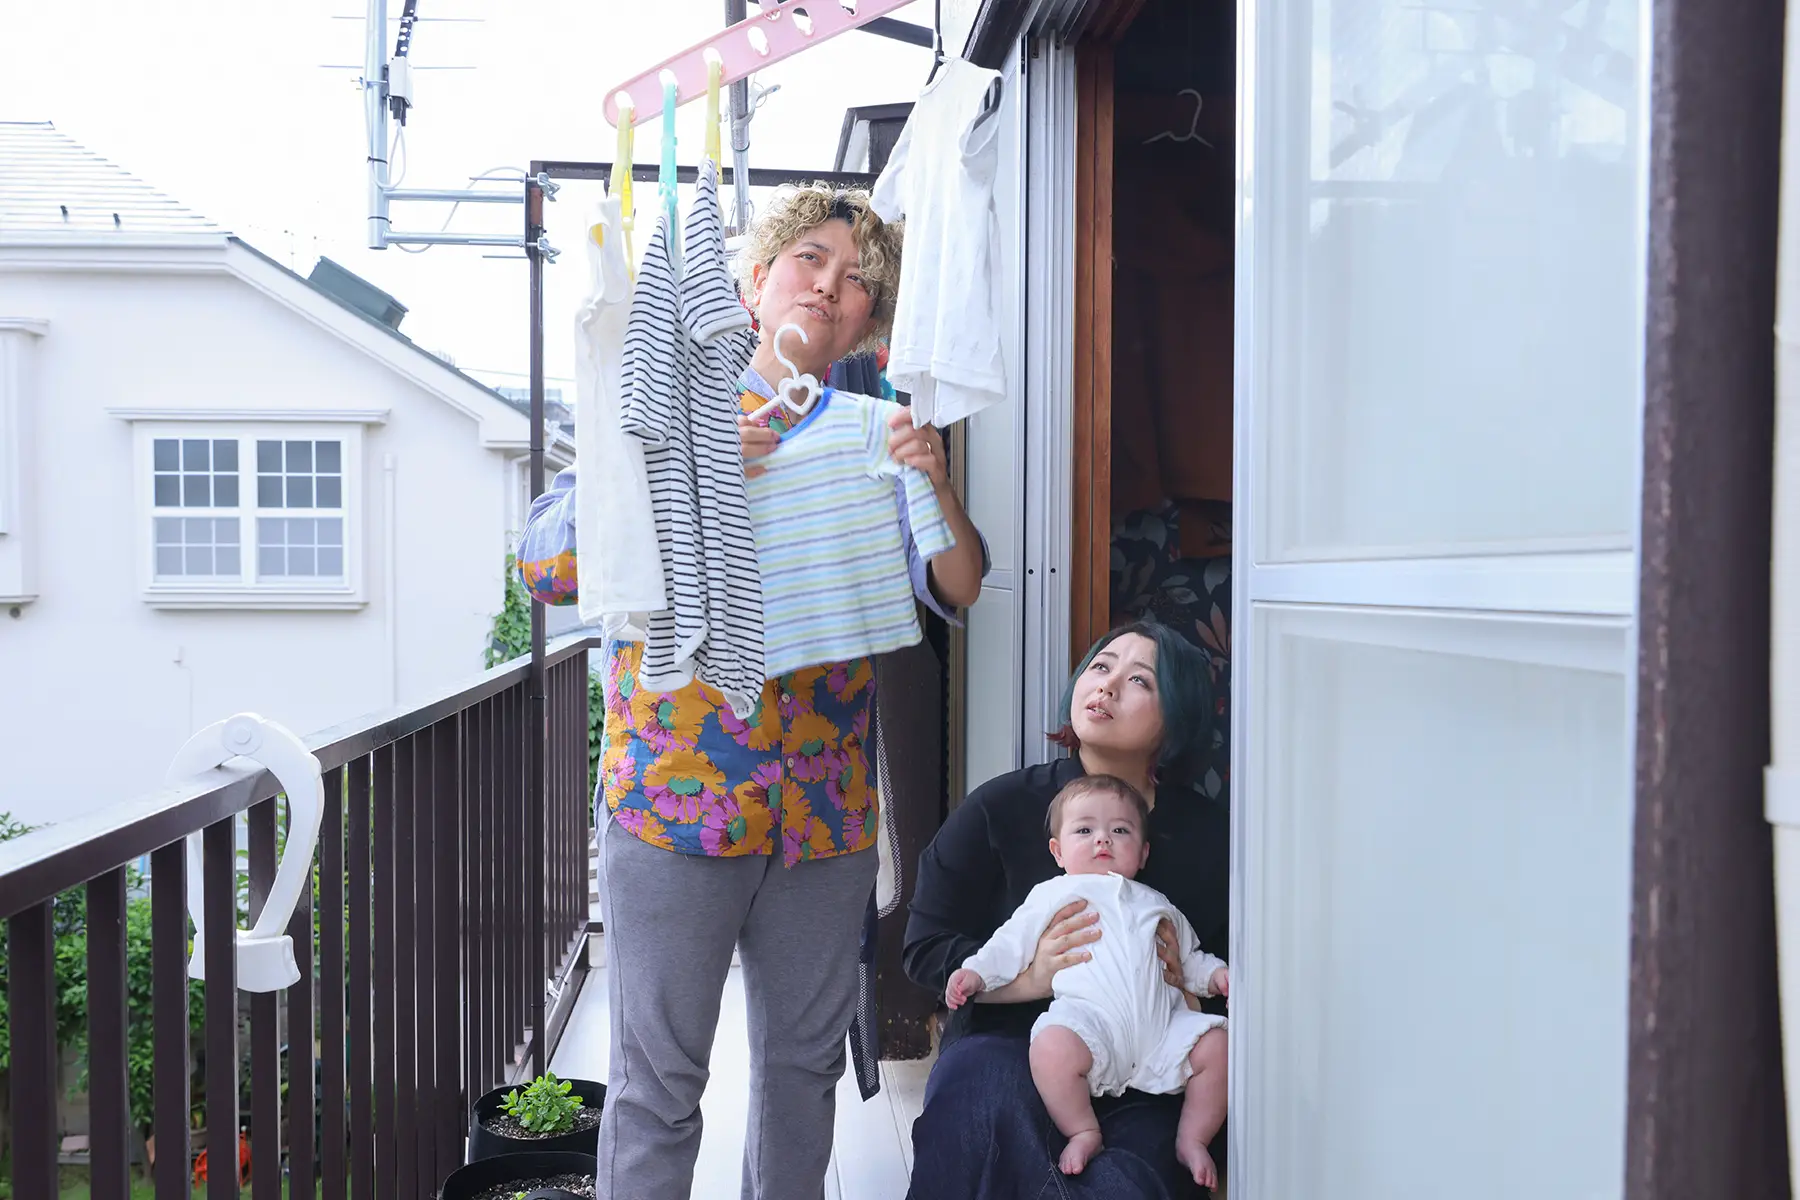 On a balcony, one mom hangs up the washing, while the other mom holds their baby